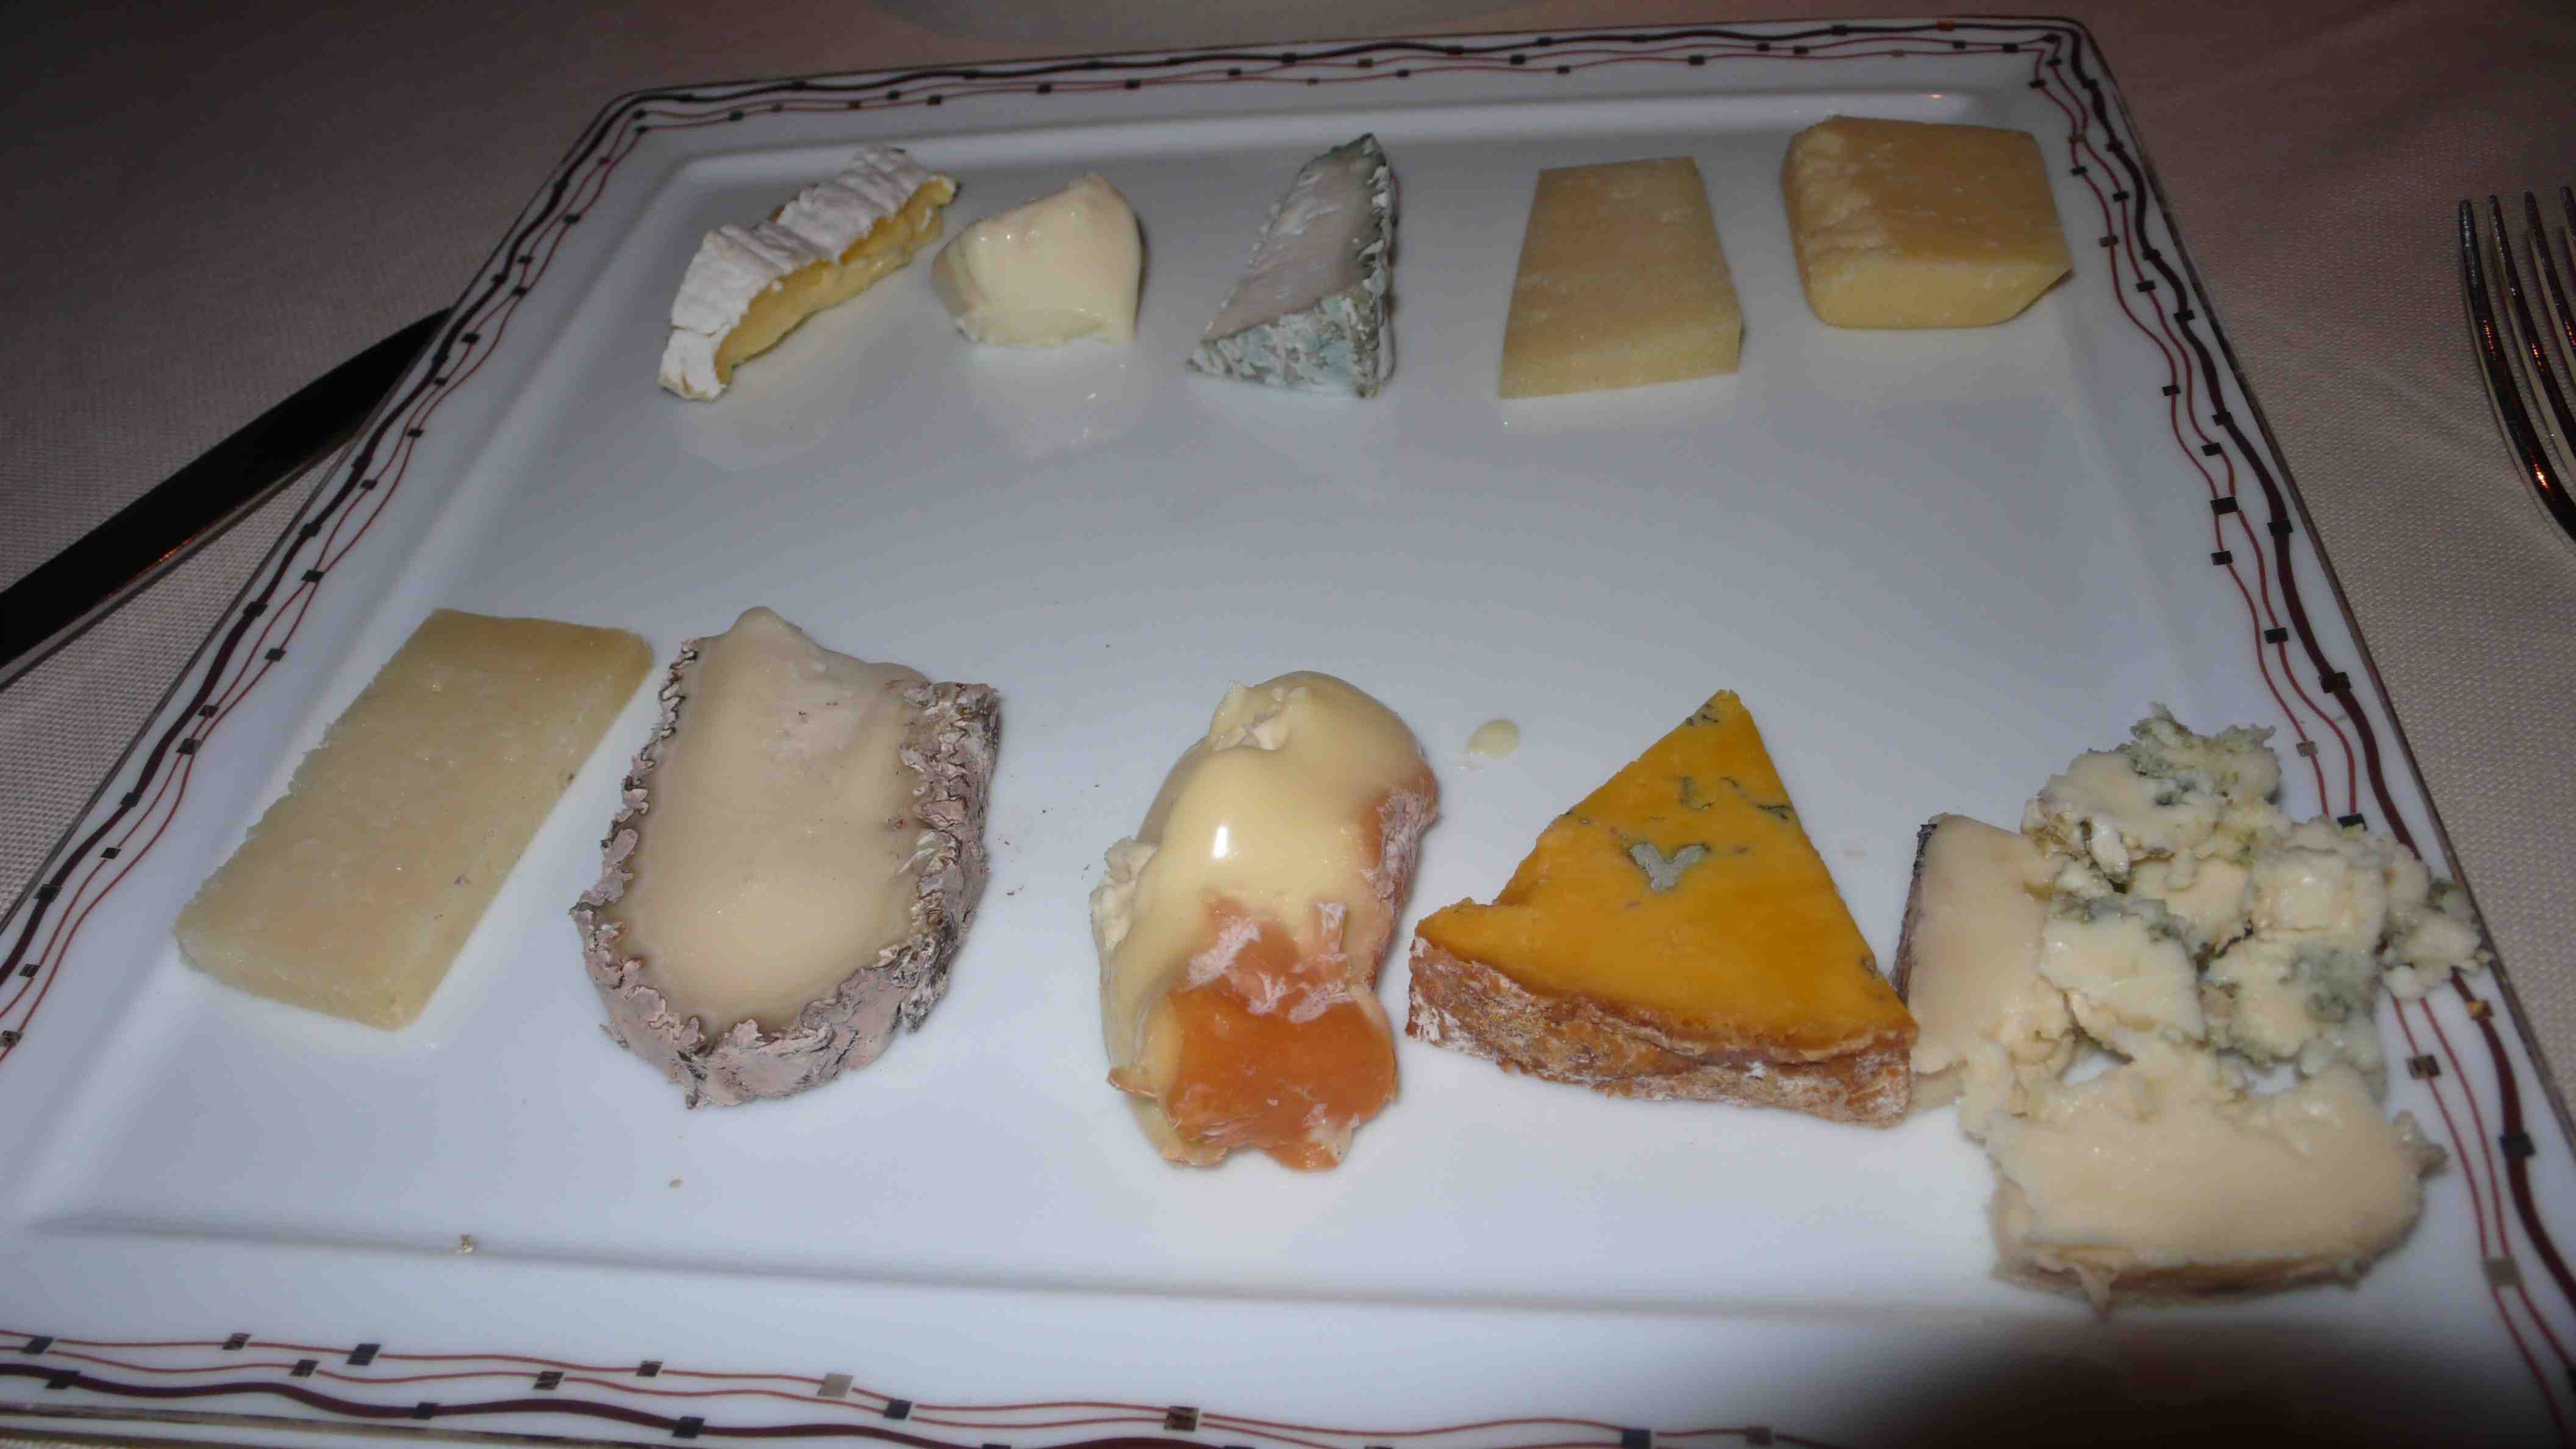 cheese, cheese and more cheese